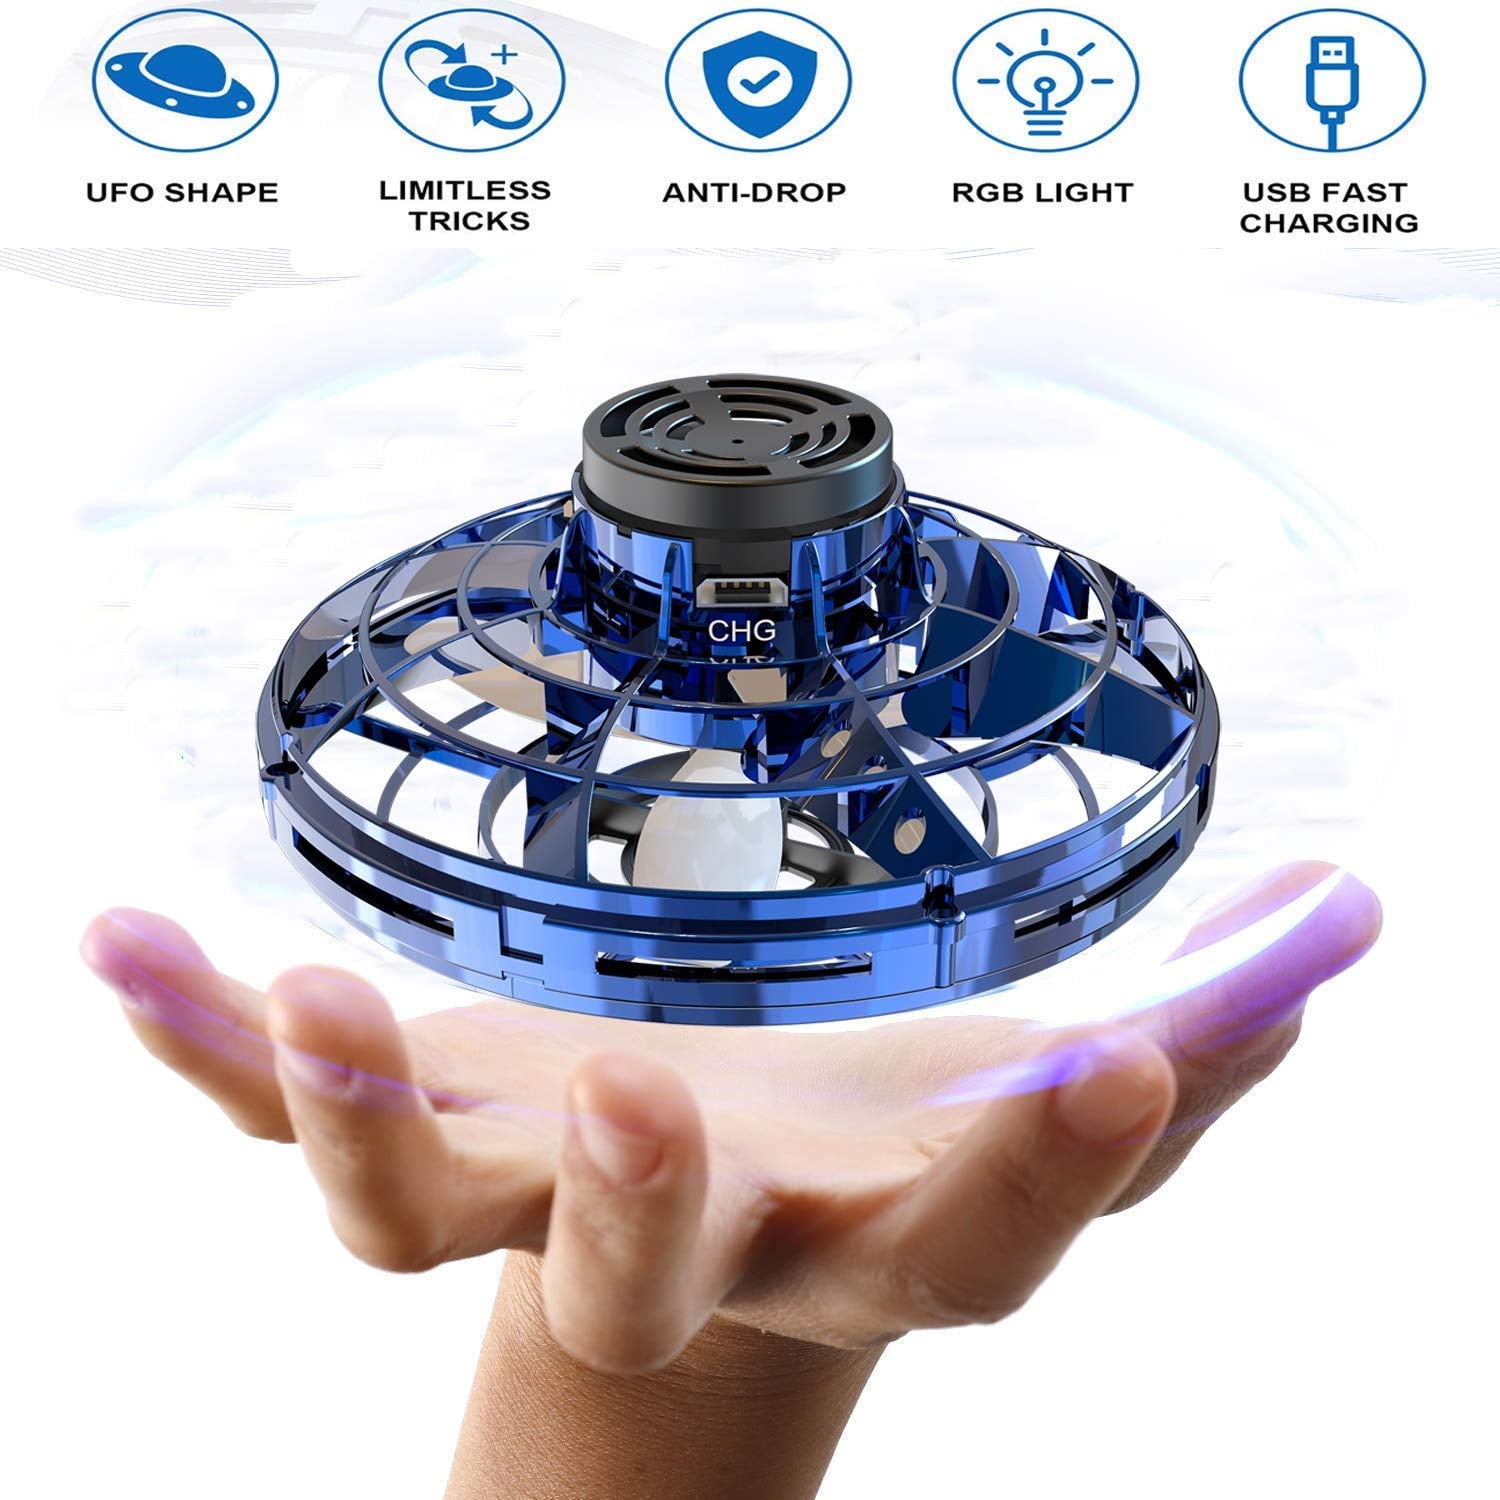 Xnk FlyNova Flying Toy Hand Operated Drones for Kids and Adults Mini Drone UFO Flying Ball Drone with 360° Rotating and Shinning LED Lights Chargeable 